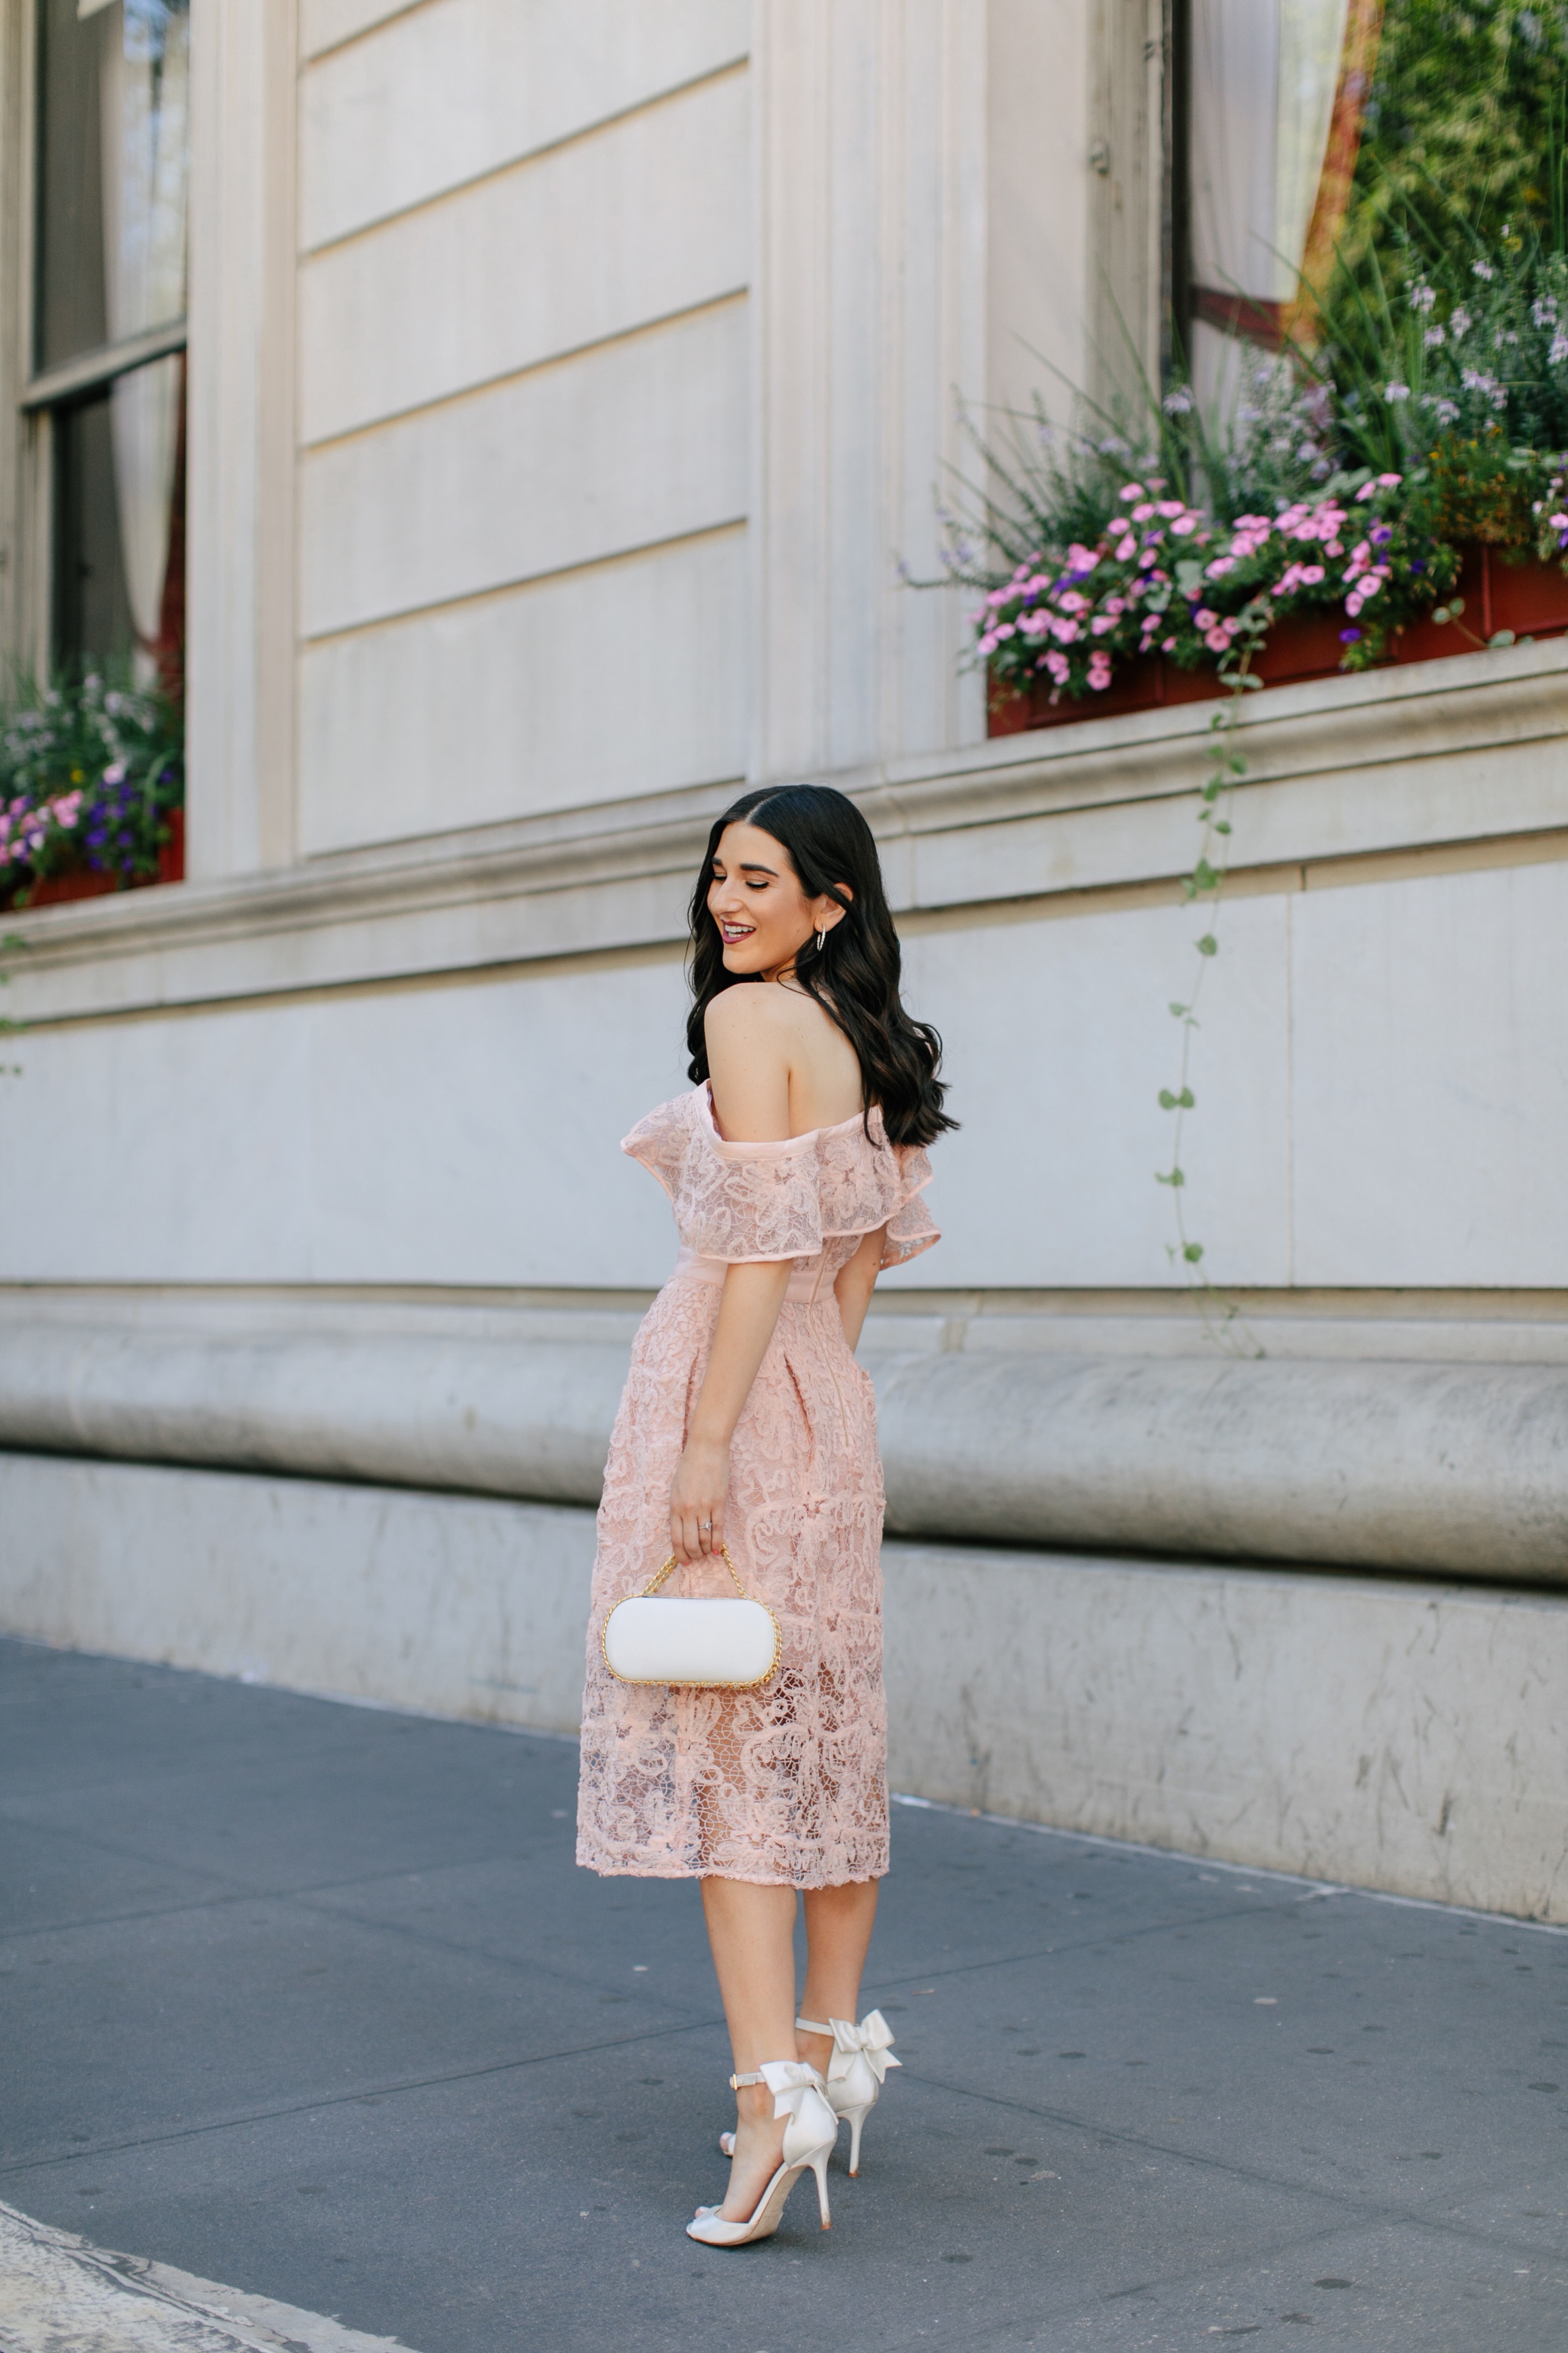 A New Perspective On Instagram Jealousy Pink Lace Dress Ivory Bow Heels Esther Santer Fashion Blog NYC Street Style Blogger Outfit OOTD Trendy White Bag Clutch Self Portrait Designer Kate Spade Wedding Shoes Fancy Elegant Feminine Formal Shopping Wear.jpg